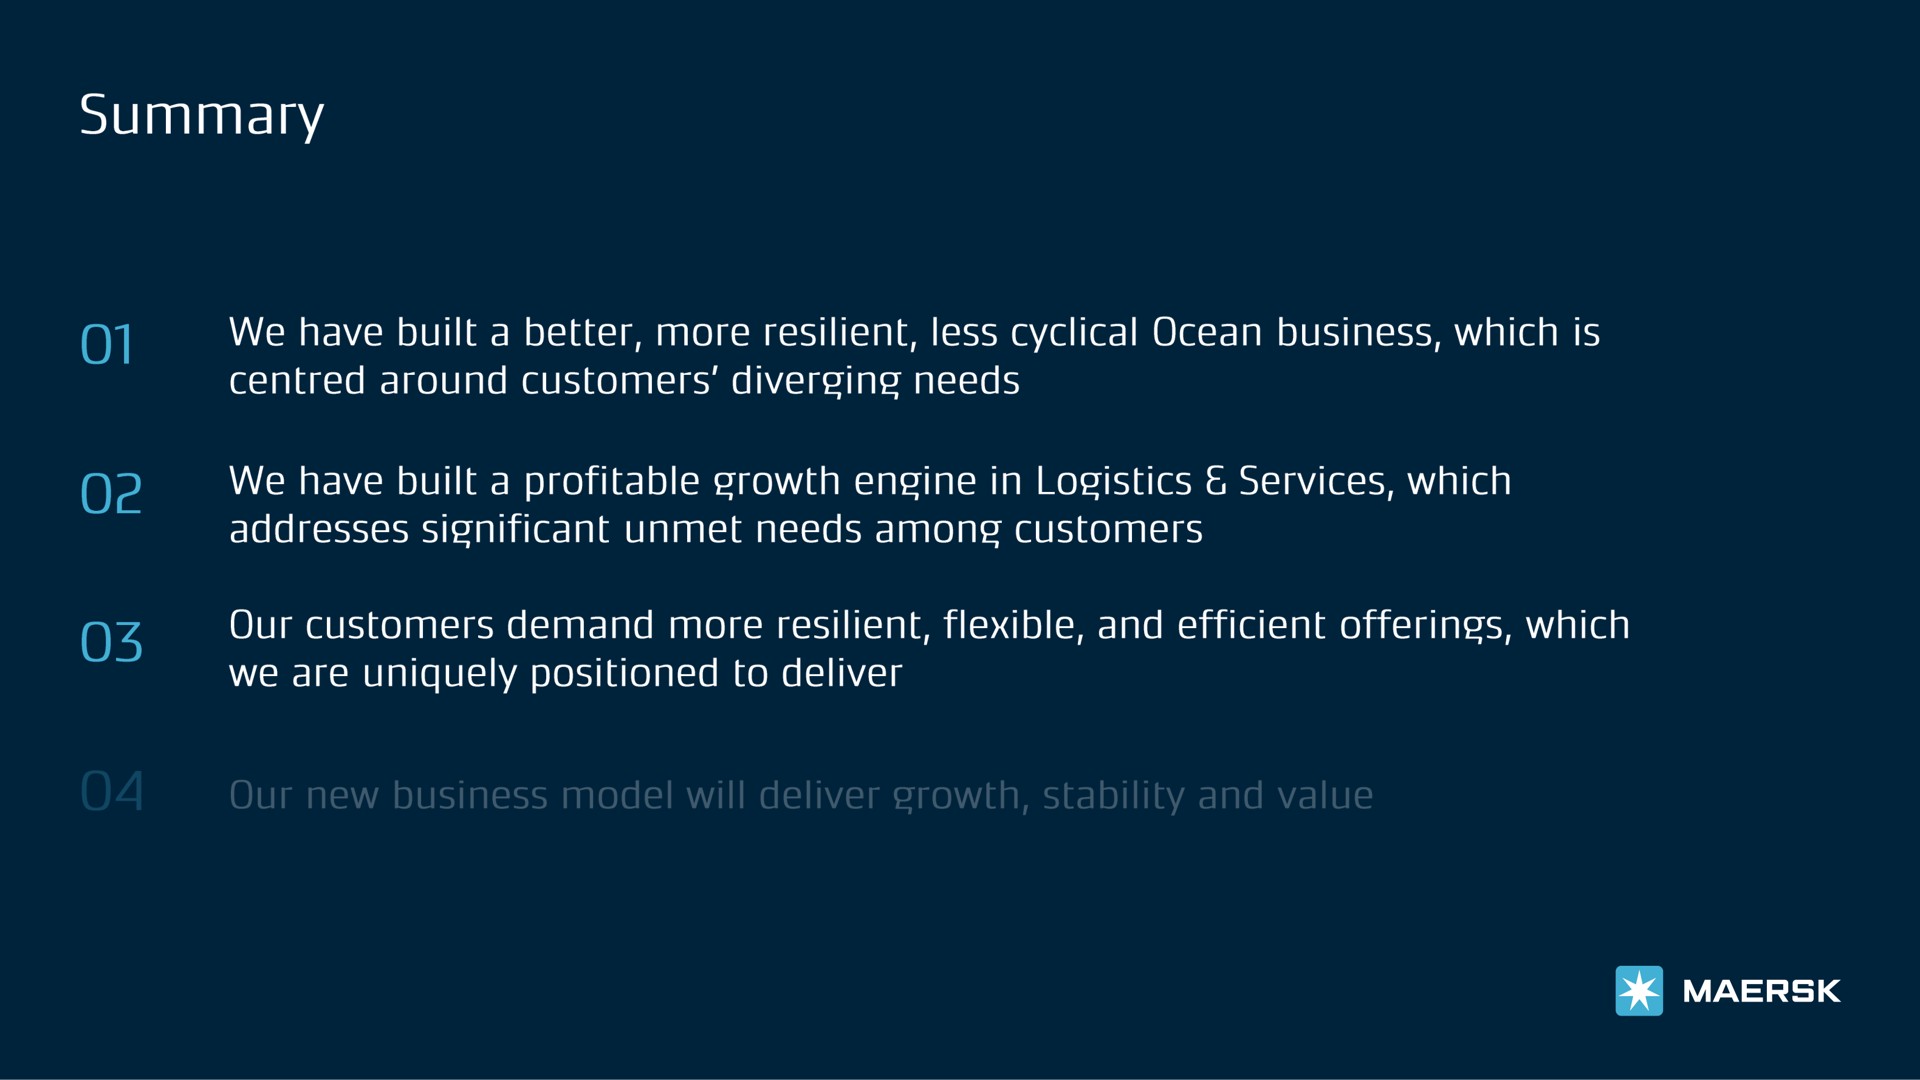 solan of we have built a better more resilient less cyclical ocean business which is around customers diverging needs we have built a profitable growth engine in logistics services which addresses significant unmet needs among customers our customers demand more resilient flexible and efficient offerings which we are uniquely positioned to deliver | Maersk